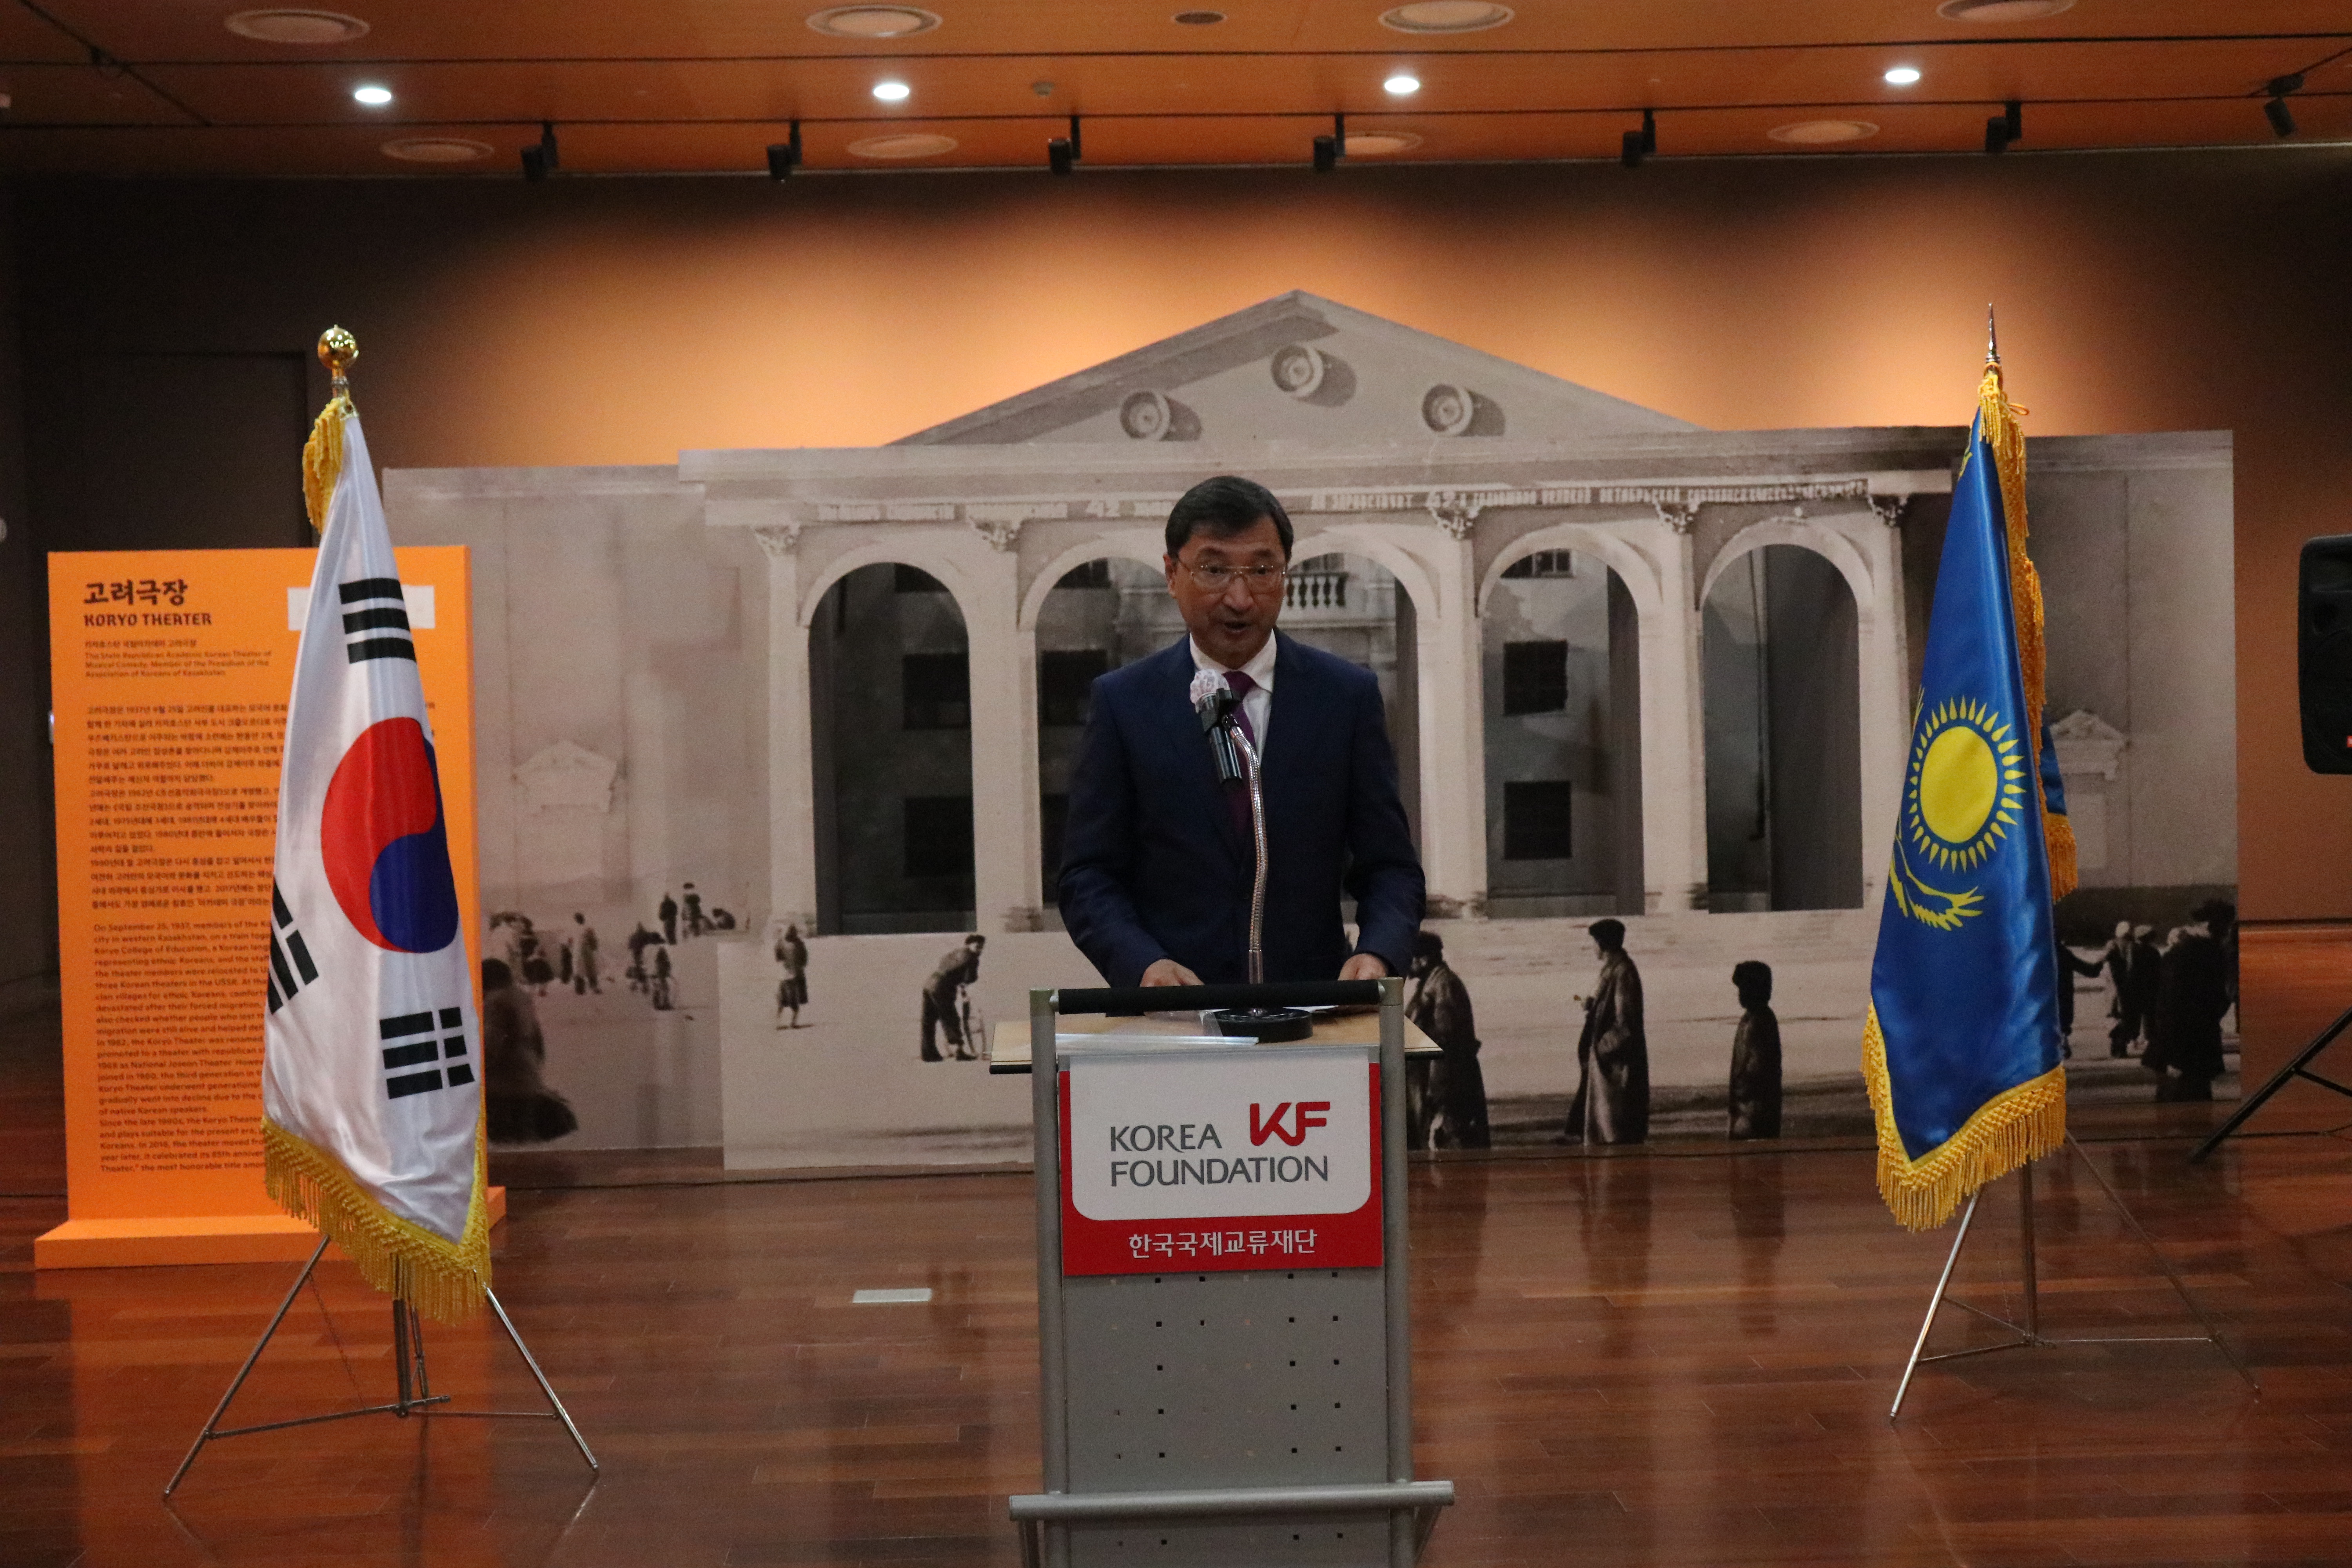 The exhibition opened in Seoul in honor of the 30th anniversary of the establishment of diplomatic relations between Kazakhstan and Korea